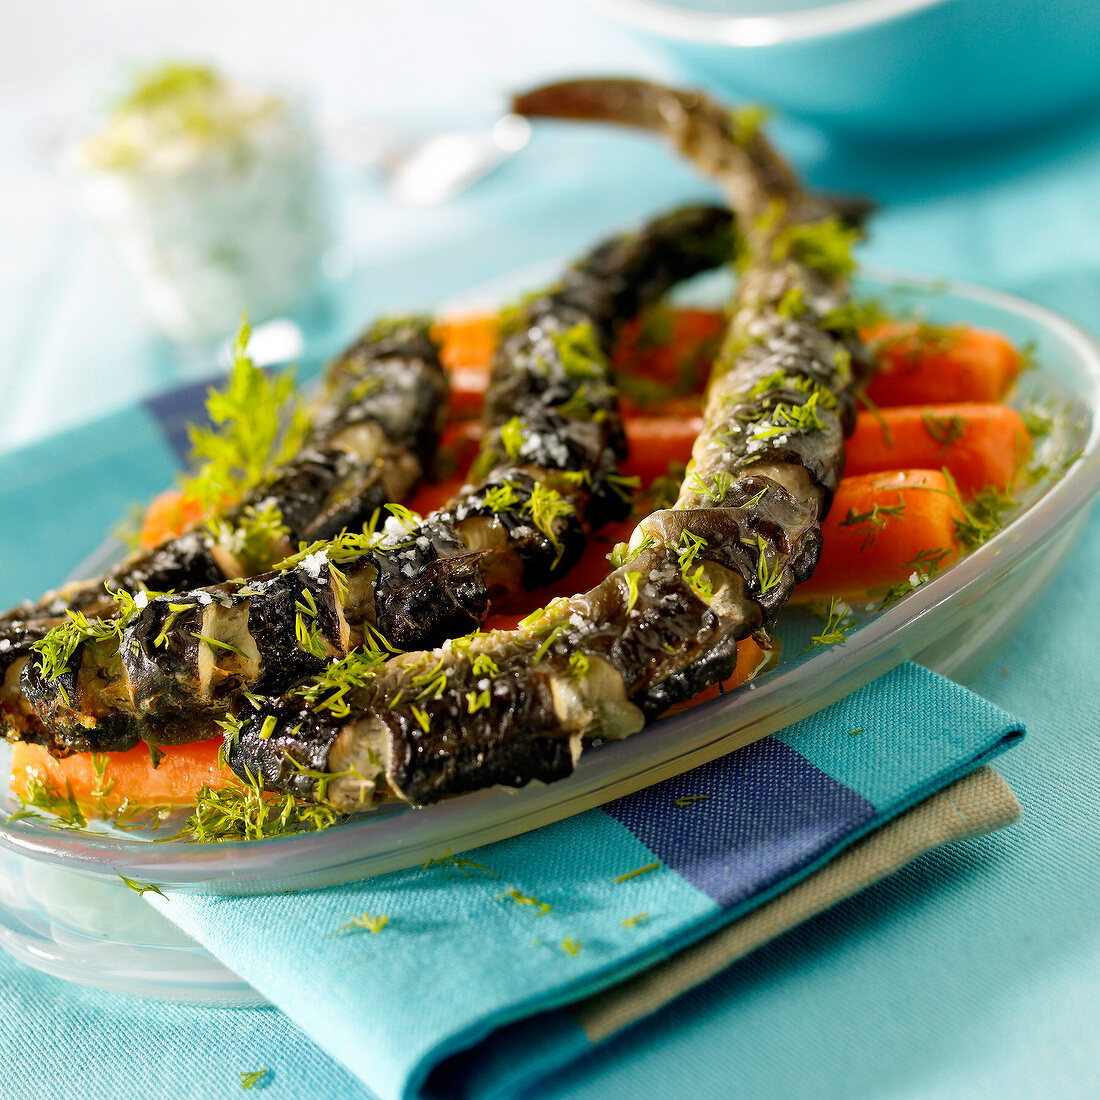 Roasted eel with dill,steamed carrots